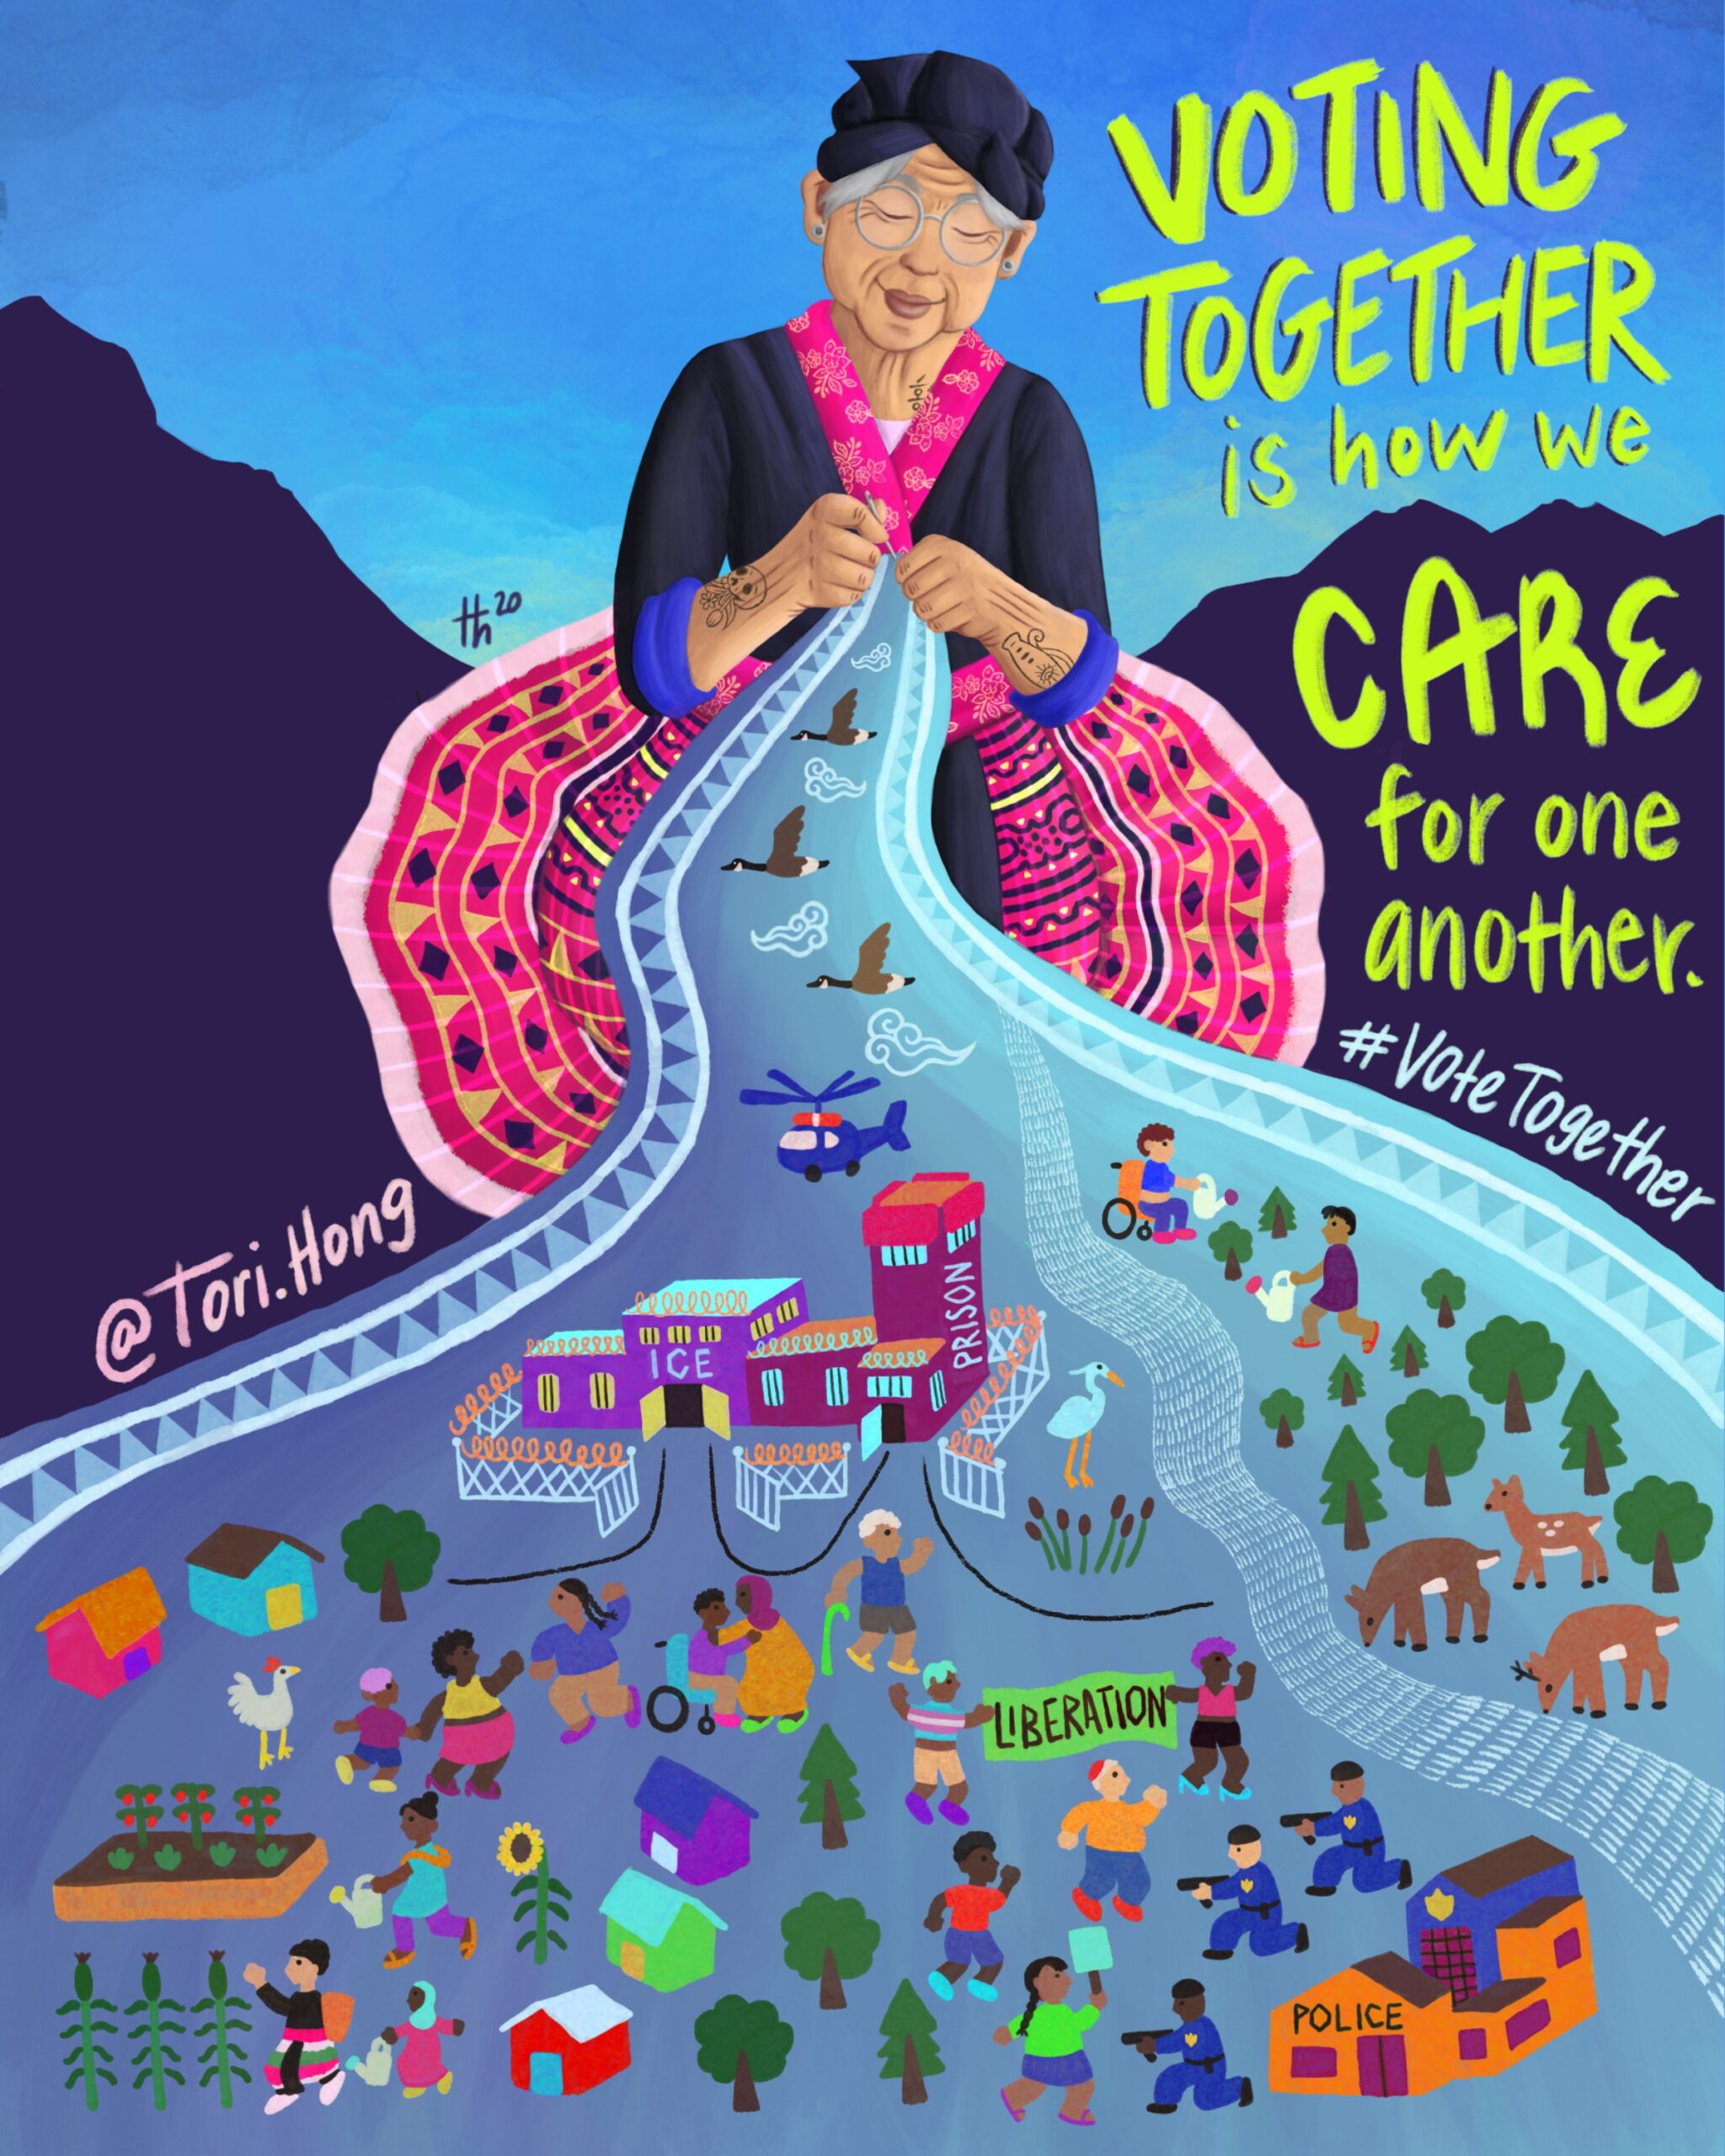 Voting together is how we care for one another. #VoteTogether @Tori.Hong. An illustrated image of an elder knitting a community